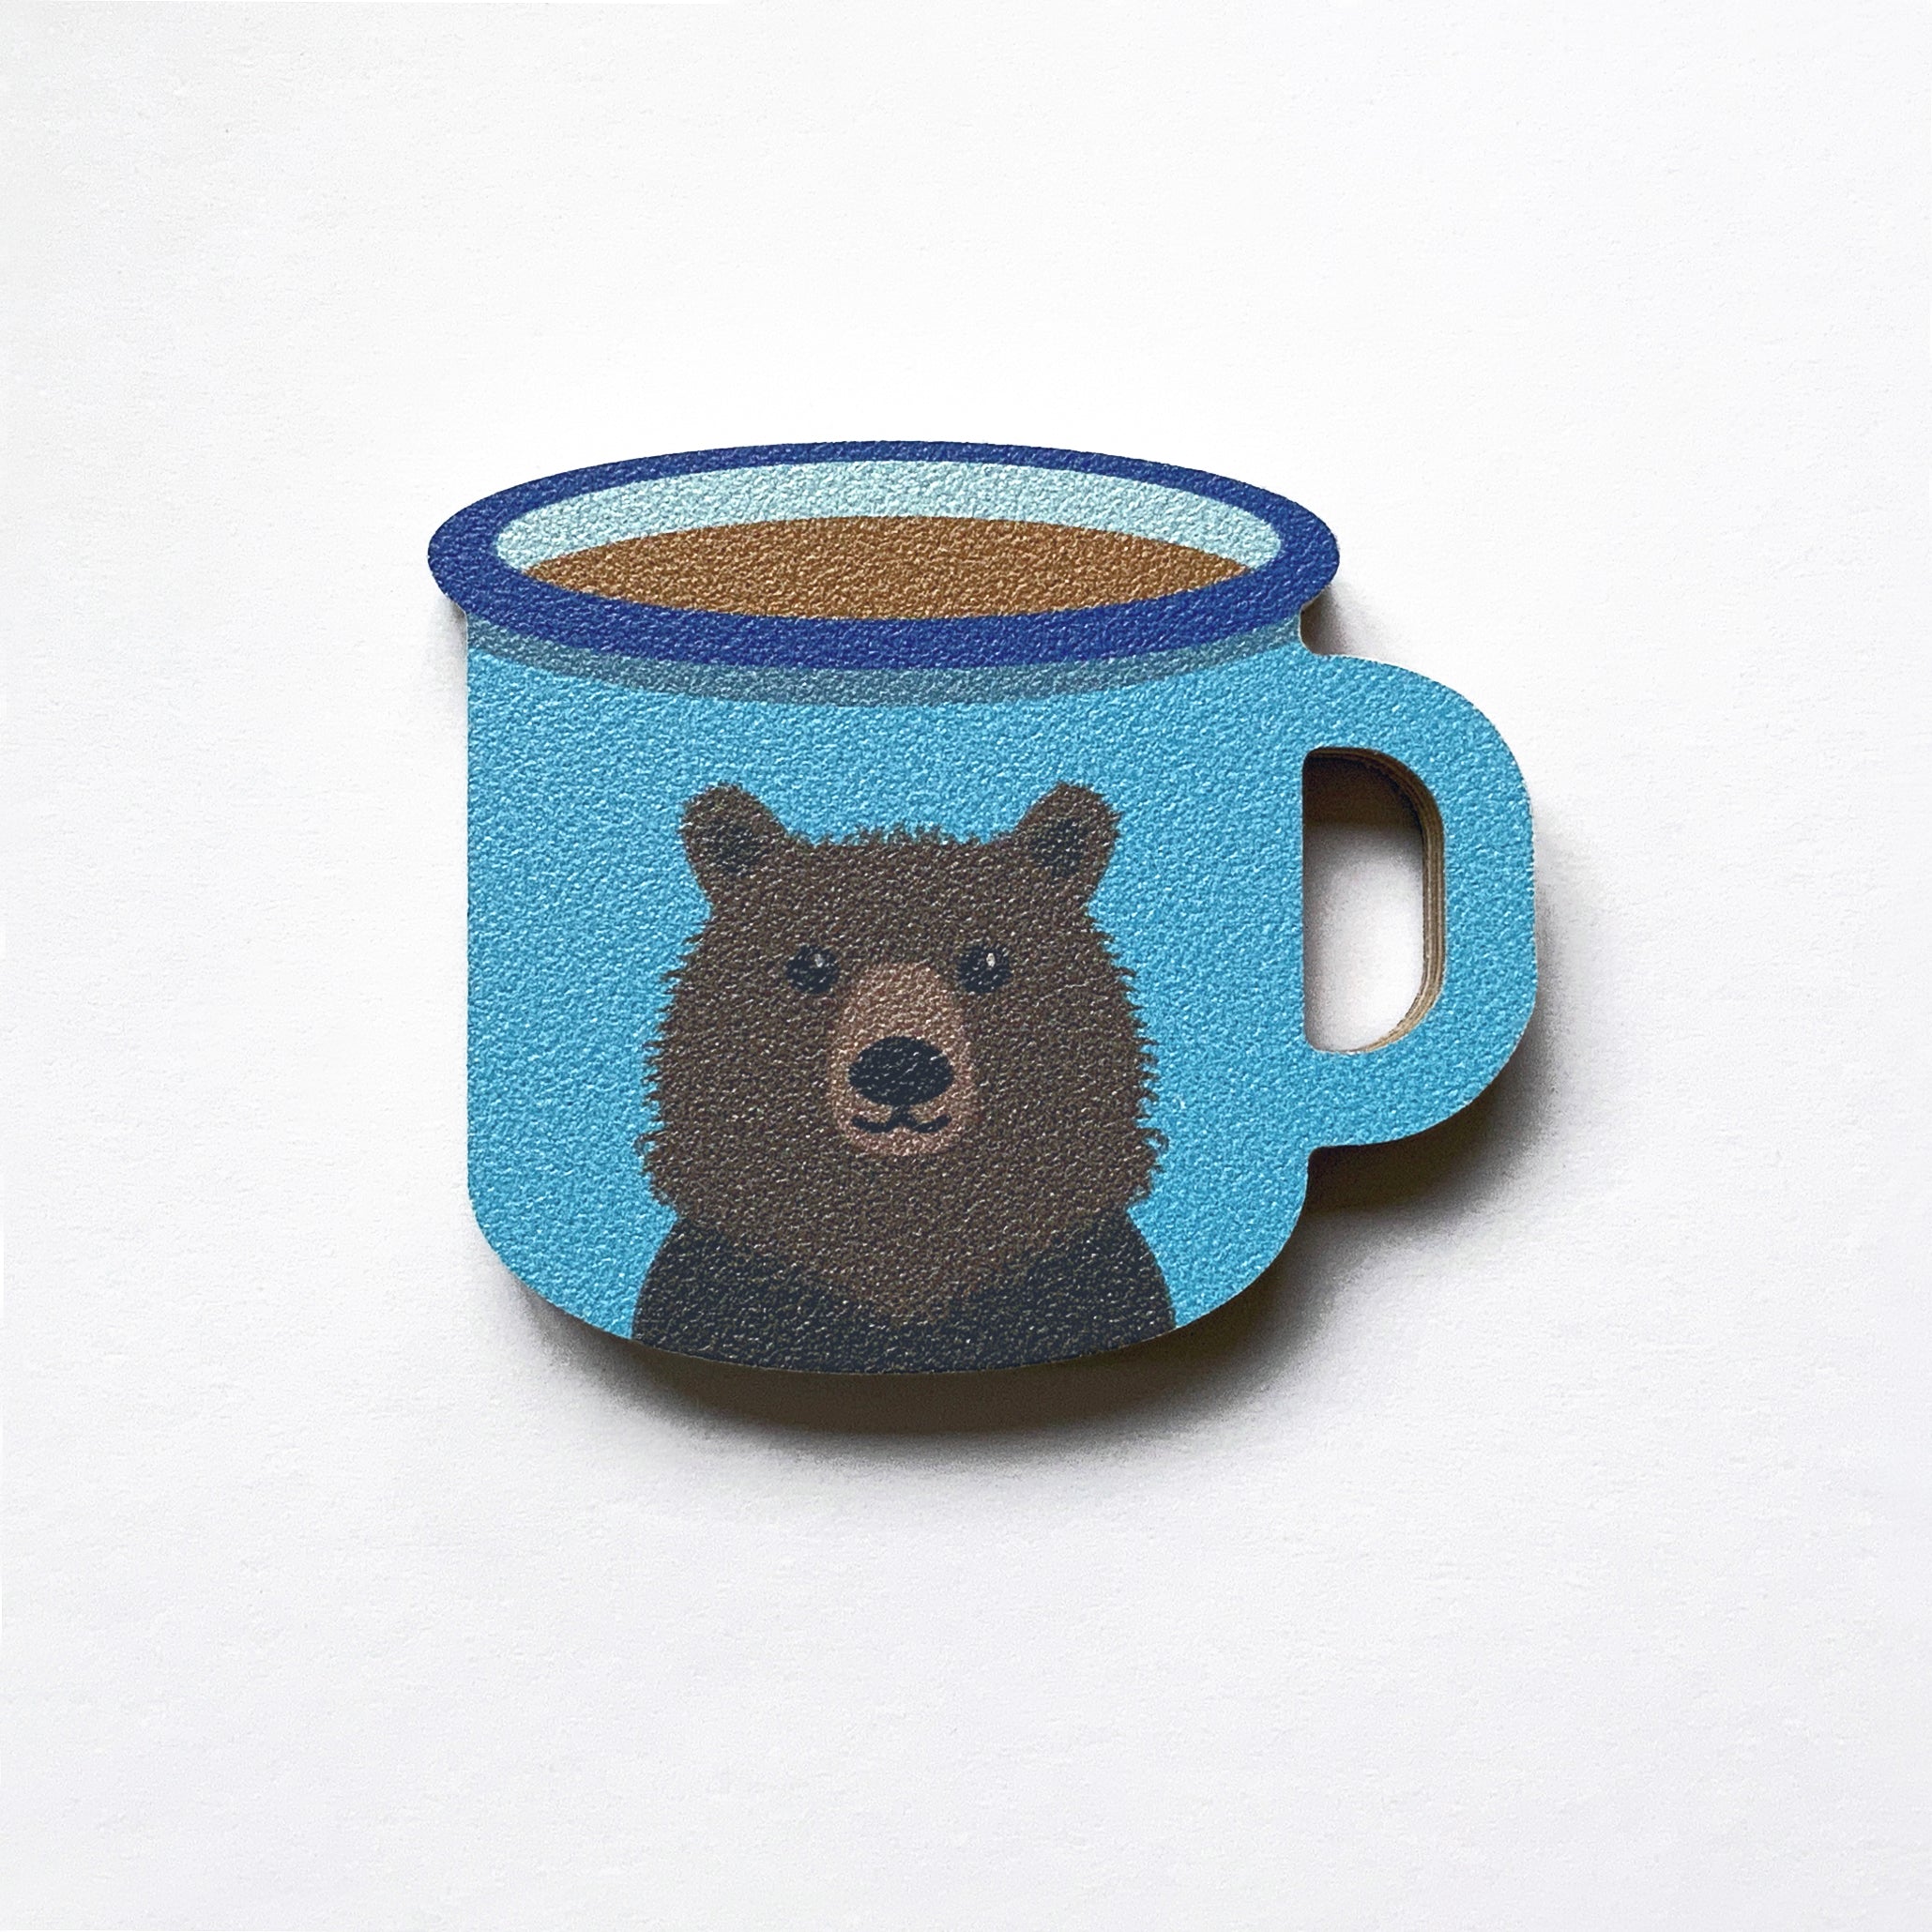 An enamel mug shaped plywood fridge magnet by Beyond the Fridge with an illustration of a brown bear on a blue background